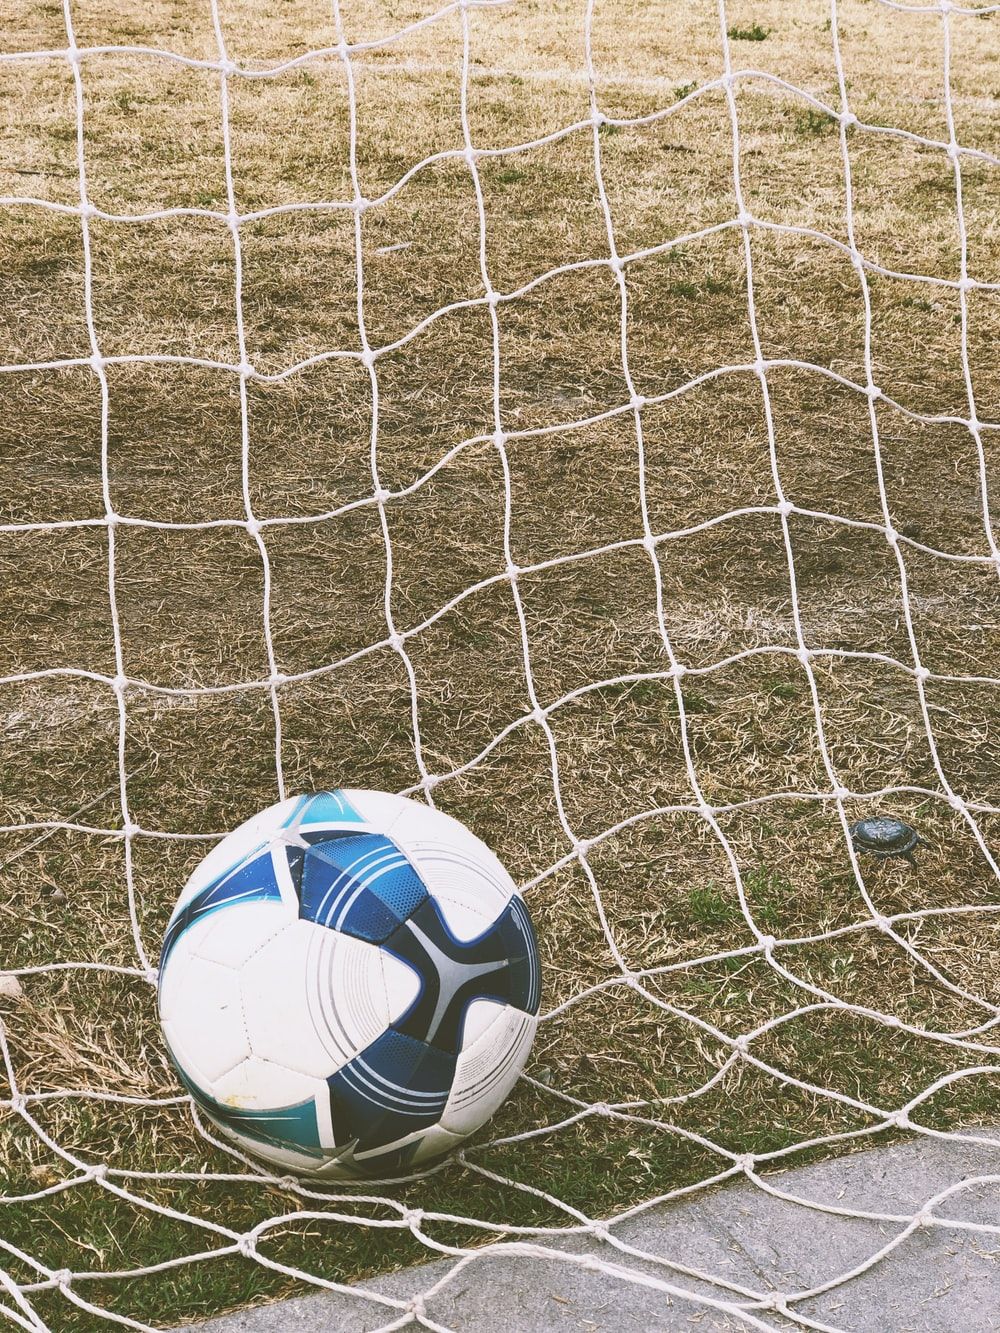 Soccer Net Picture. Download Free Image